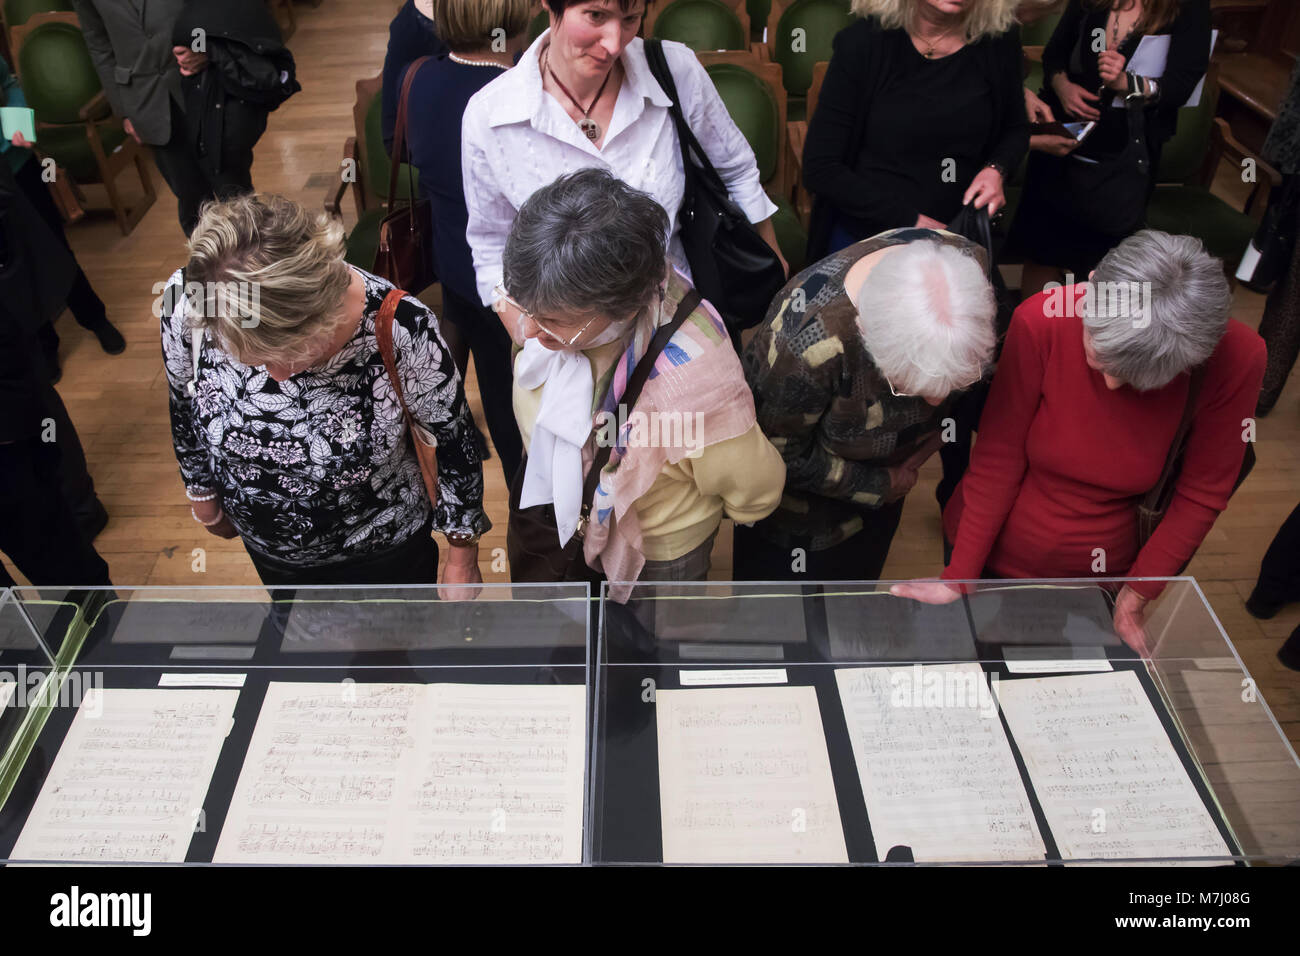 Budapest, Hungary. 10th Mar, 2018. People view Hungarian composer Franz Liszt's manuscripts which are previously thought lost in the Franz Liszt Memorial Museum and Research Center in Budapest, Hungary, on March 10, 2018. The manuscripts believed to be of famous Hungarian composer Franz Liszt were presented in the museum on Saturday in a solemn ceremony. Credit: Attila Volgyi/Xinhua/Alamy Live News Stock Photo